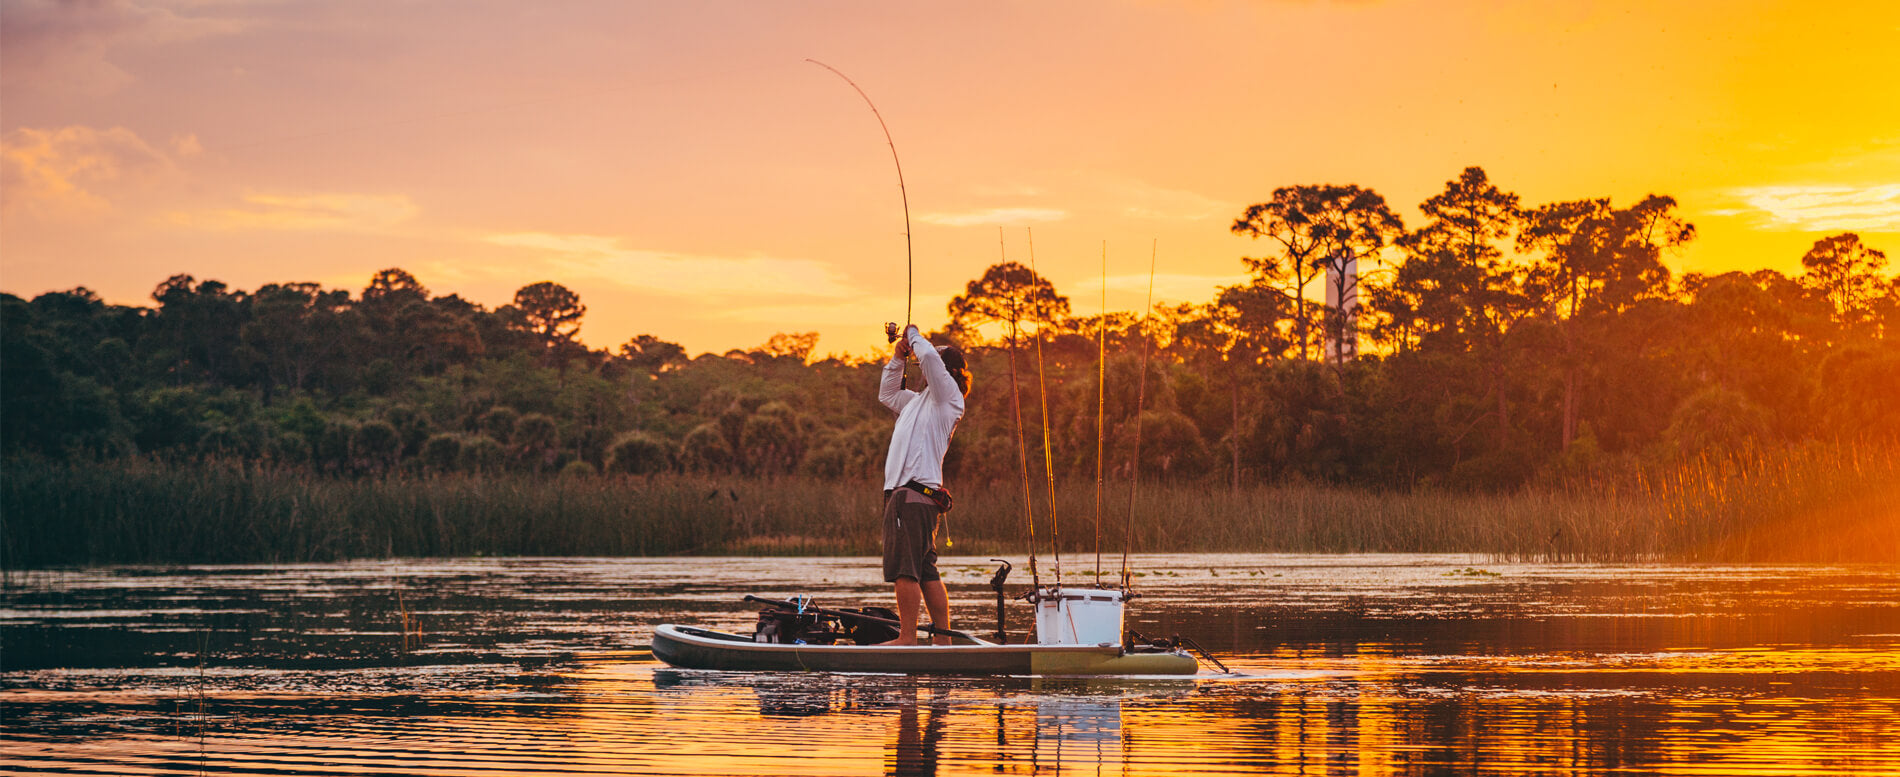 The best paddle board fishing accessories